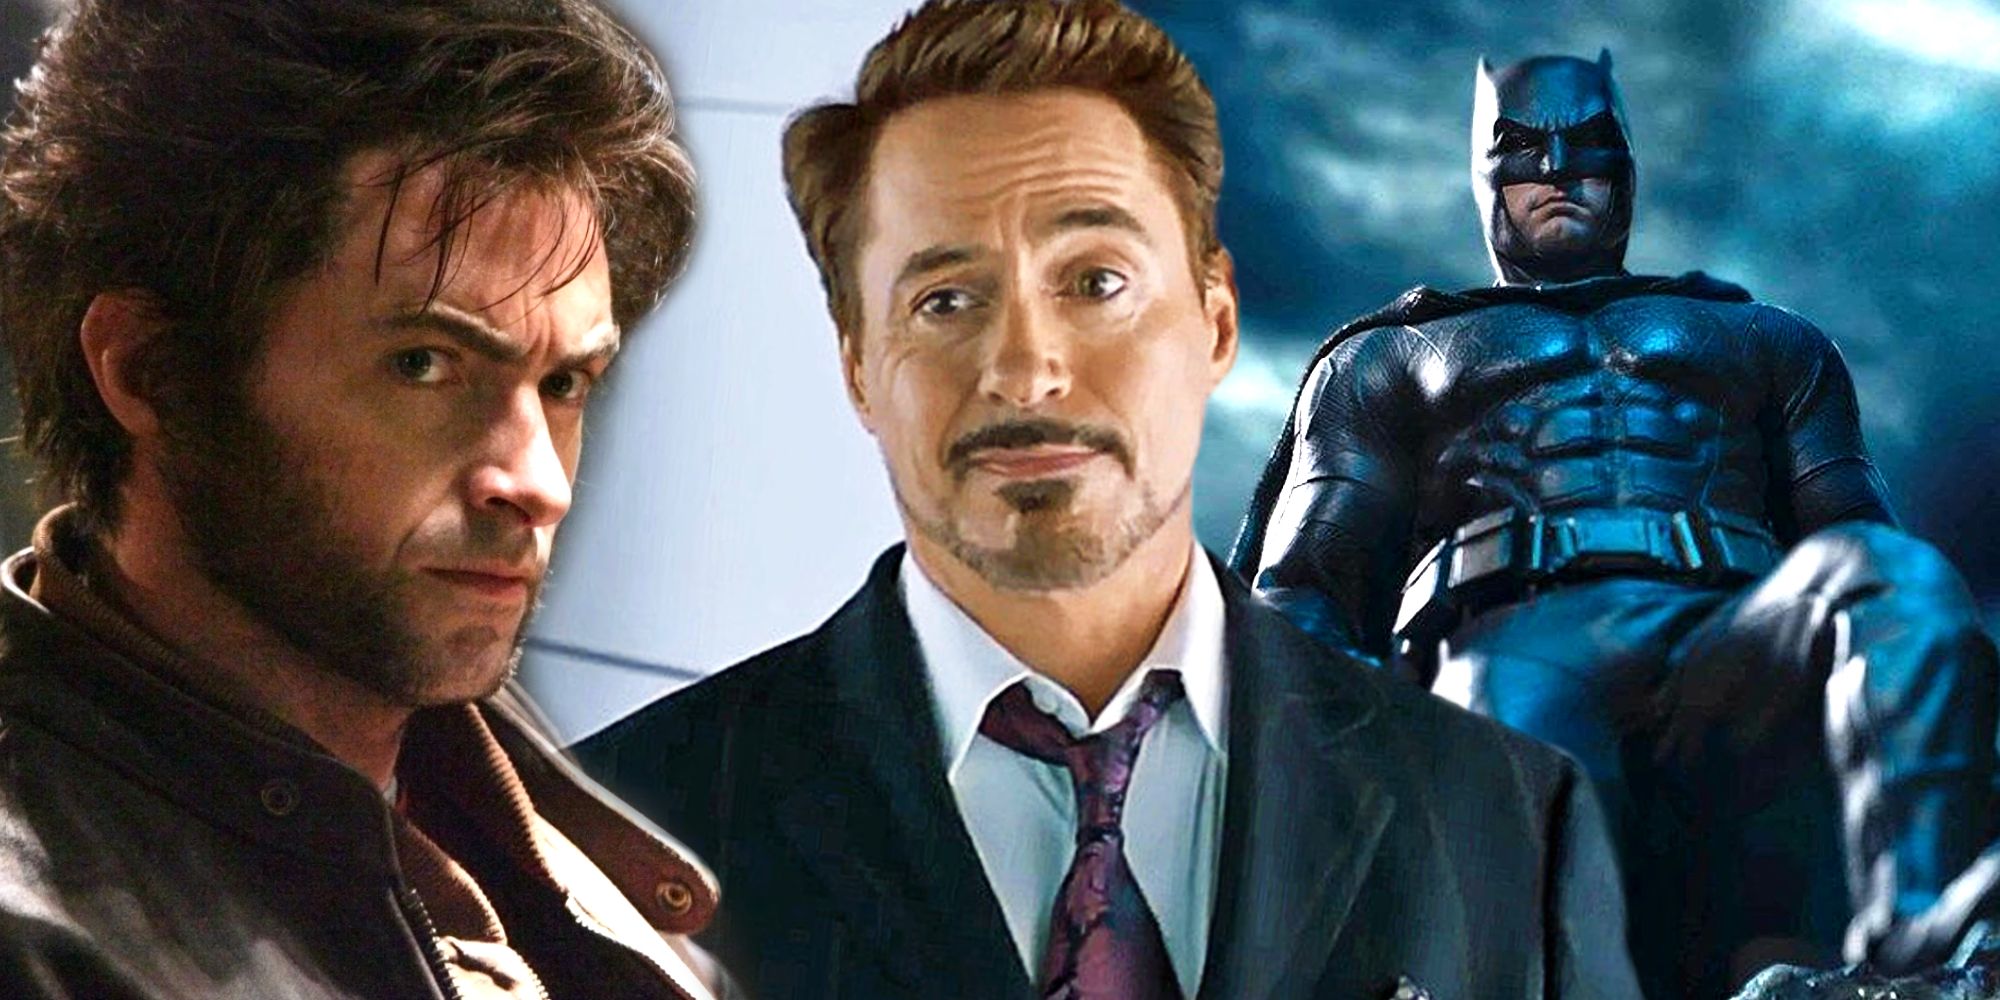 Wolverine, Tony Stark, and Batman in Live-Action